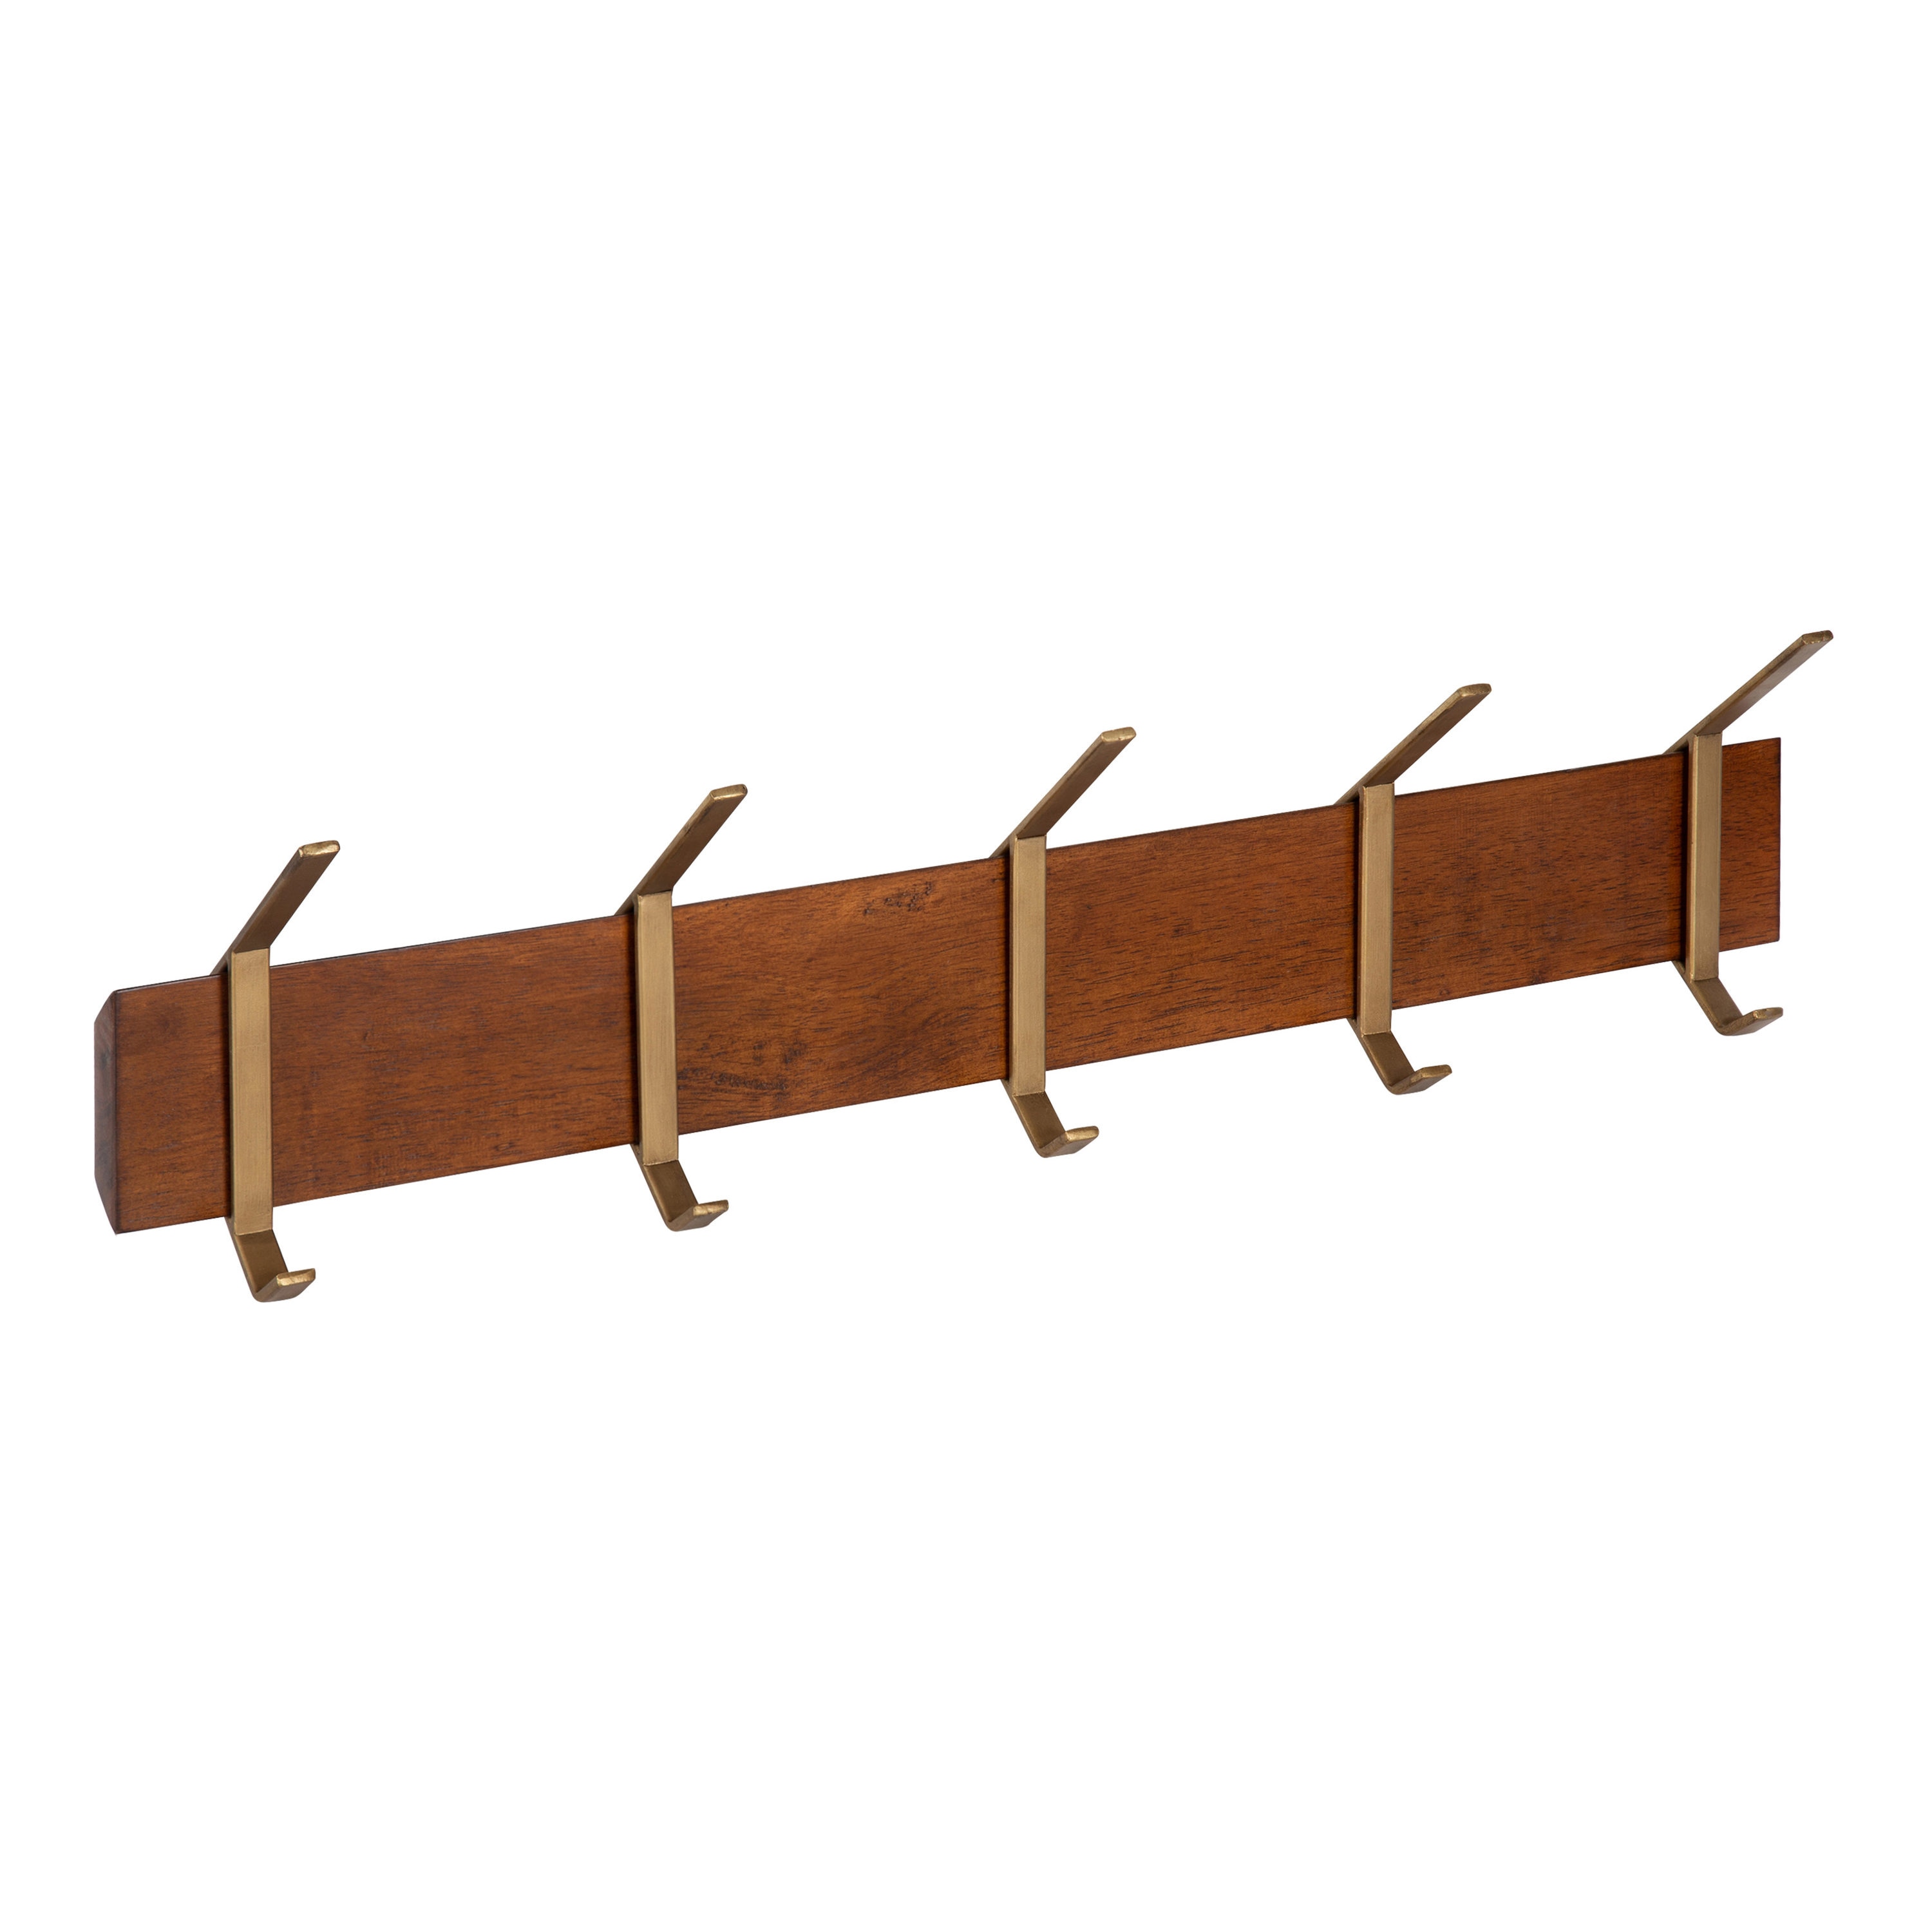 Amherst 18 Curved Walnut Coat Hanger - Curved Wood Hangers